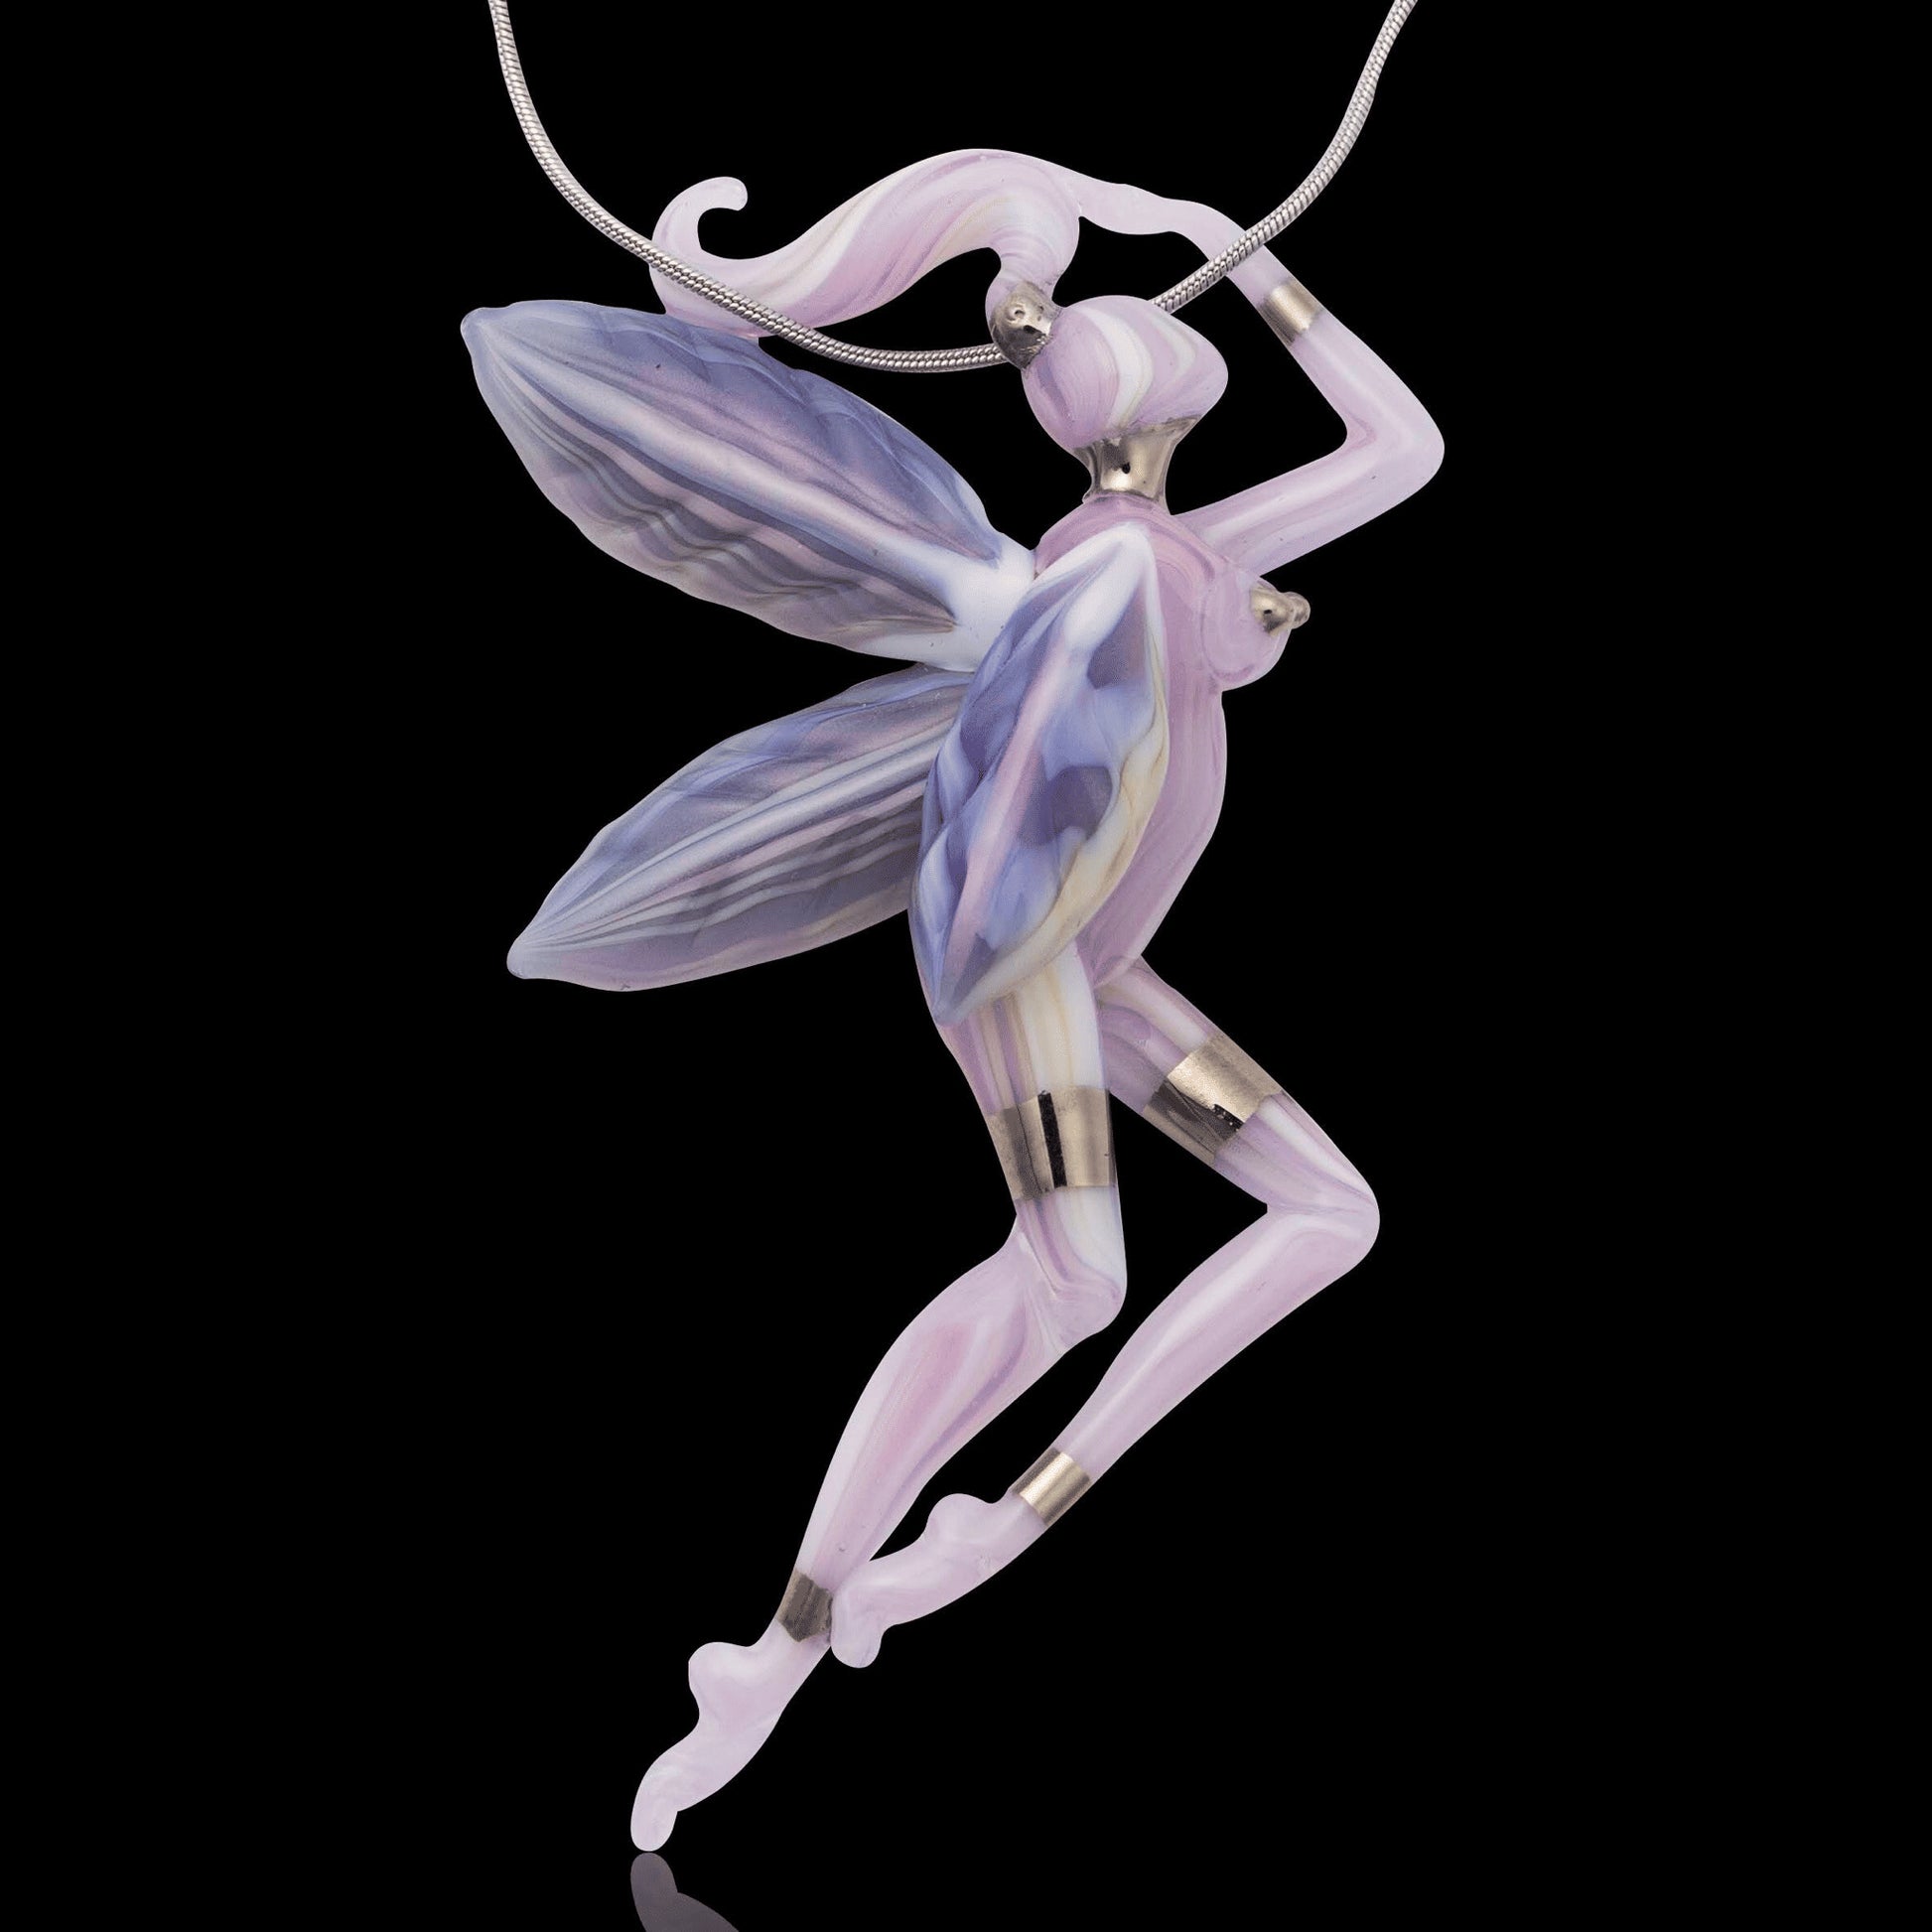 meticulously crafted glass pendant - Fairy Pendant by Sibelley x Trip A (Sweater Weather)